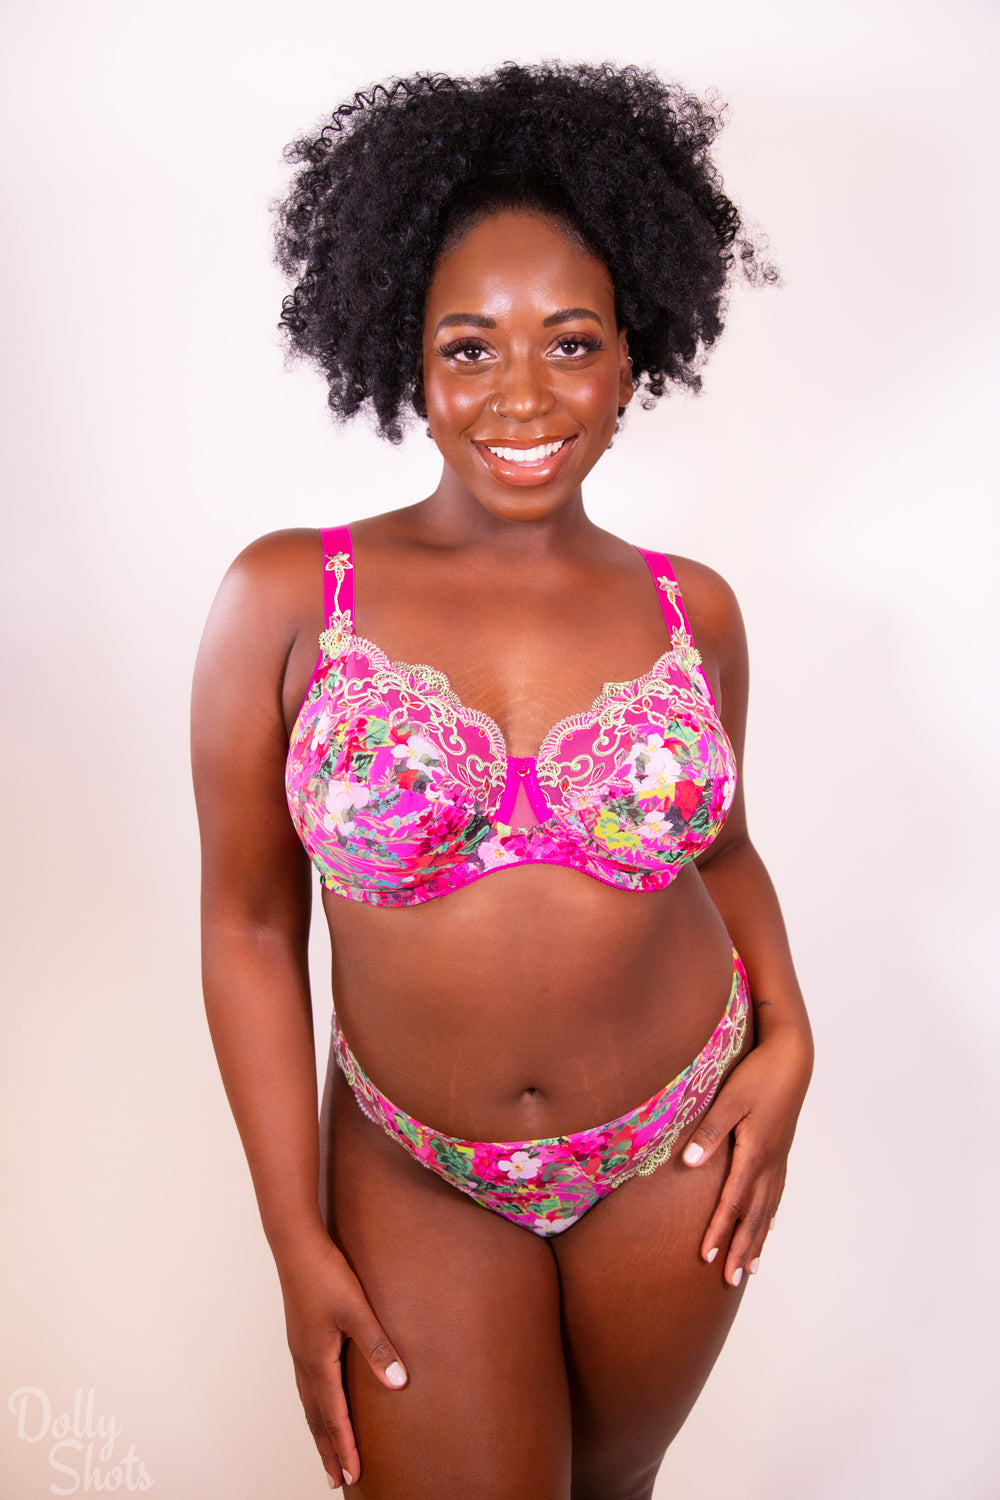 Women's Lingerie for sale in Chaguanas, Trinidad and Tobago